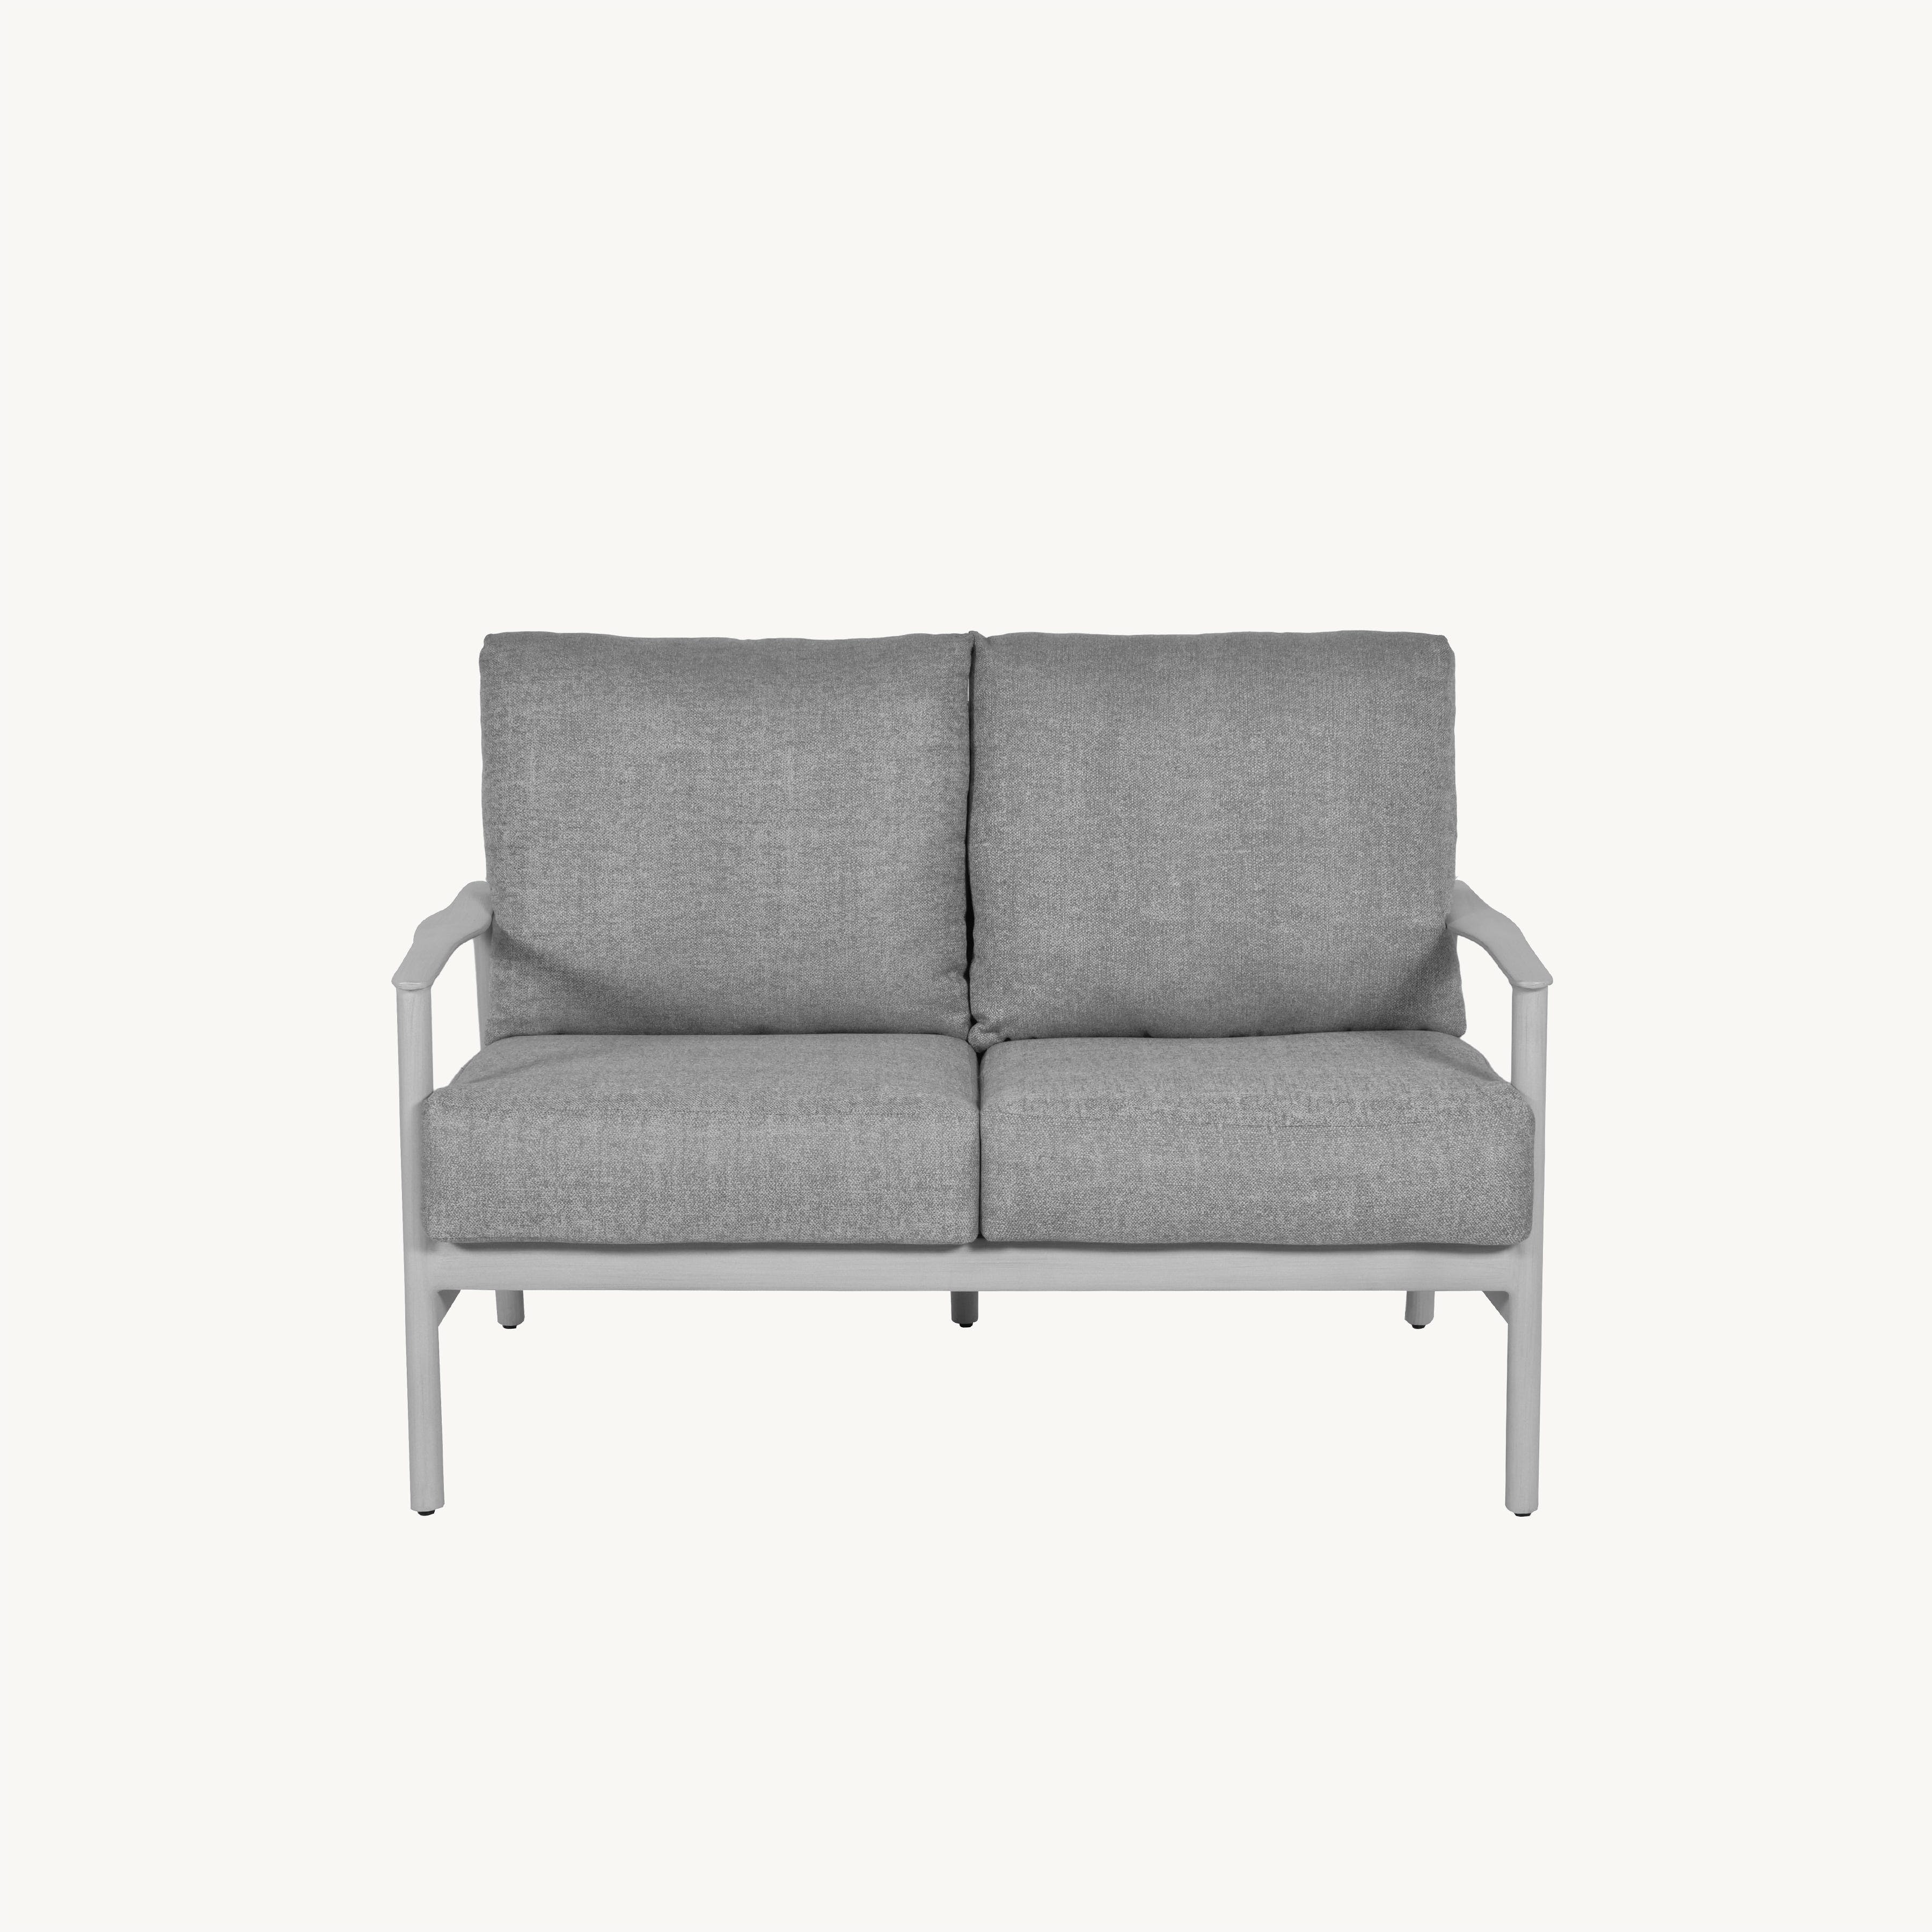 Barbados Cushion Lounge Loveseat By Castelle